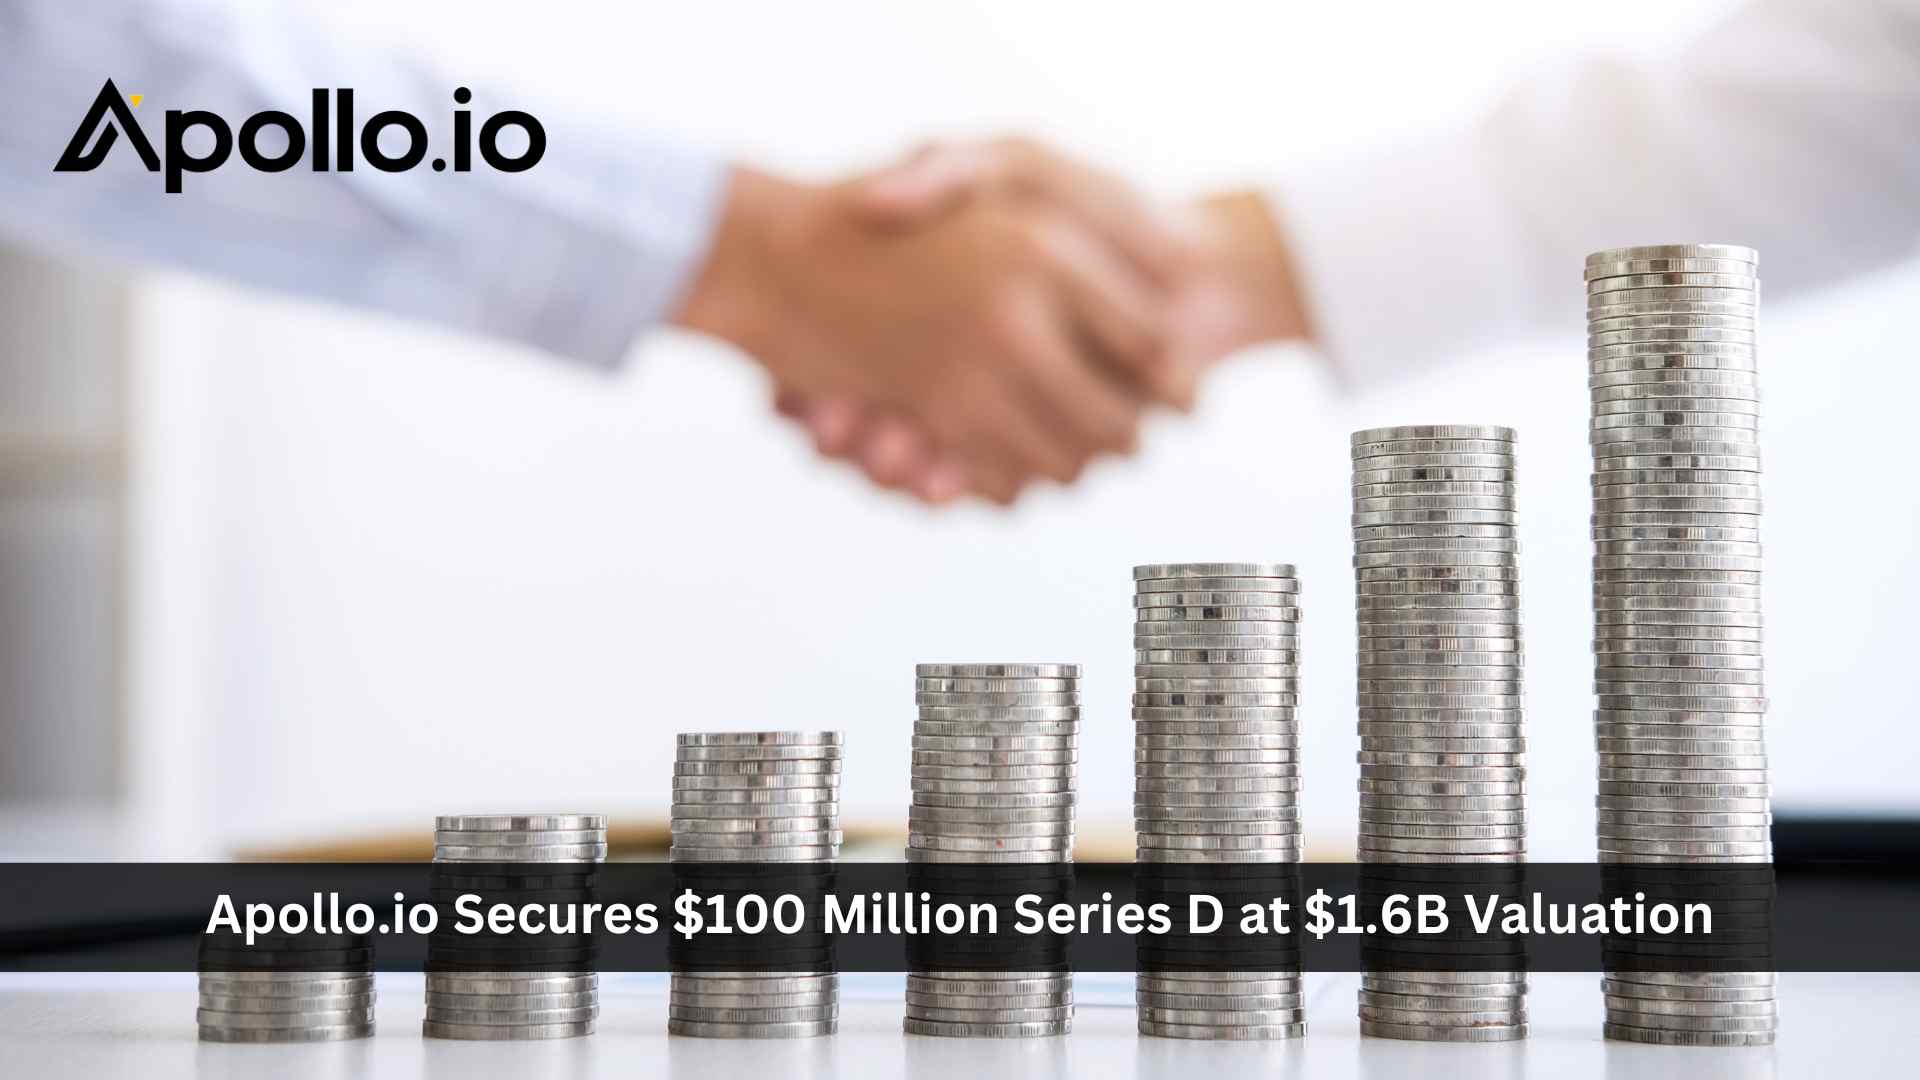 Apollo.io Secures $100 Million Series D at $1.6B Valuation to Make World-Class Go-To-Market Accessible to All